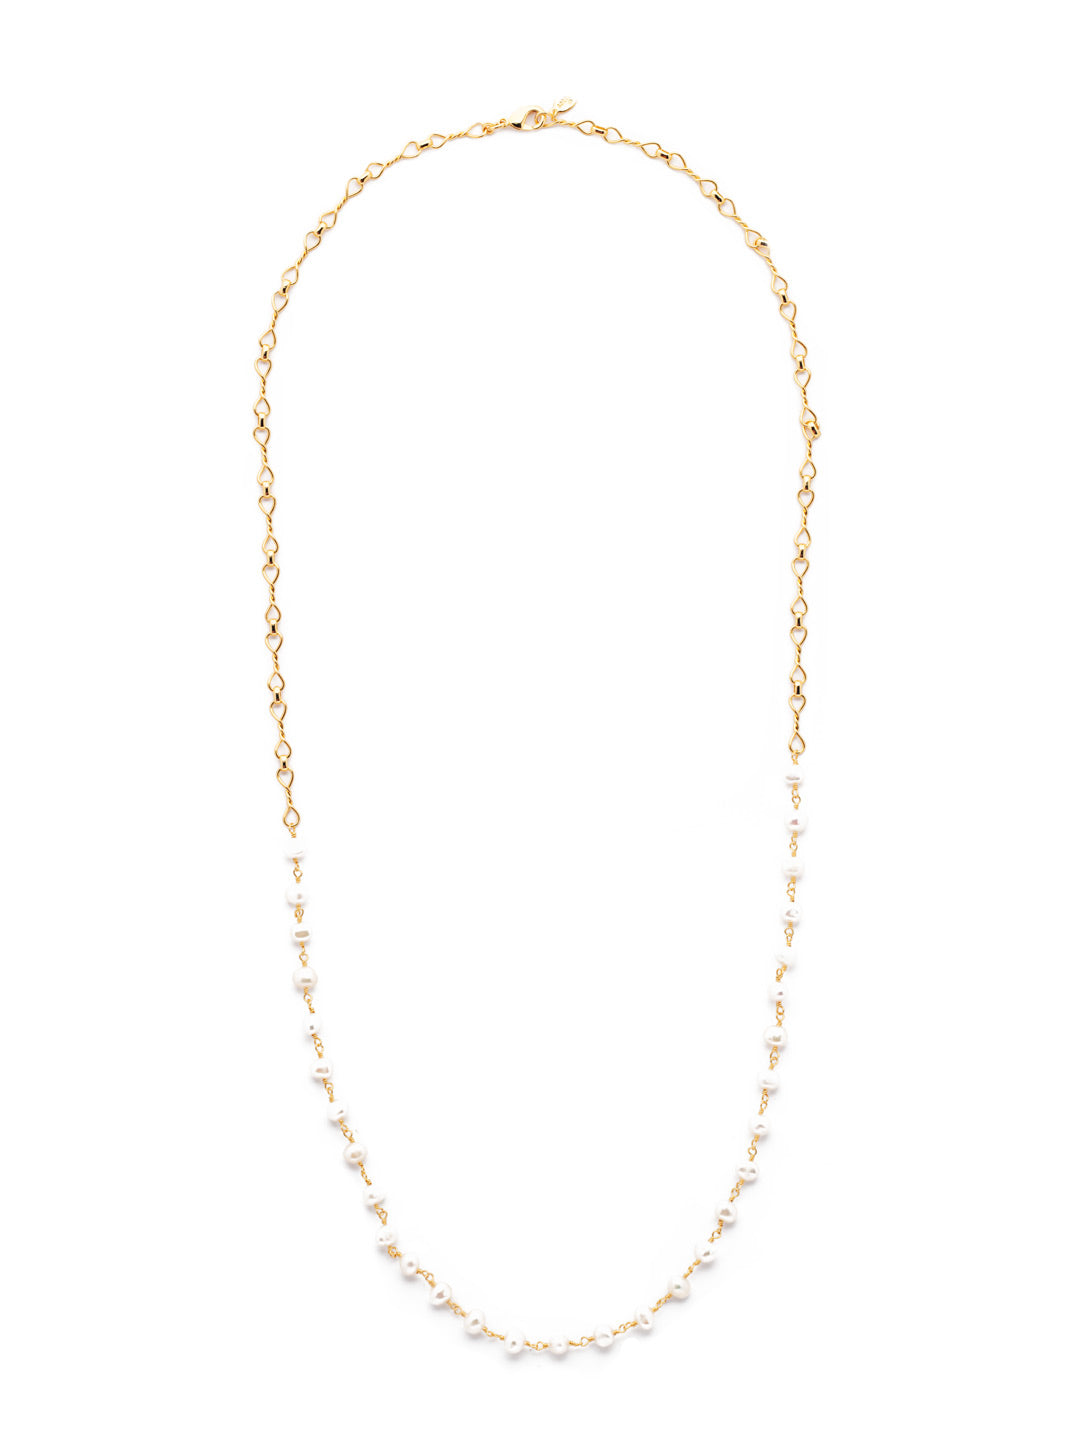 Alison Long Necklace - 4NEV12BGMDP - <p>Wear long or wrap in layers; the Alison Long Necklace is a versatile must-have piece. A string of freshwater pearls blend beautifully between the metal chain links. From Sorrelli's Modern Pearl collection in our Bright Gold-tone finish.</p>